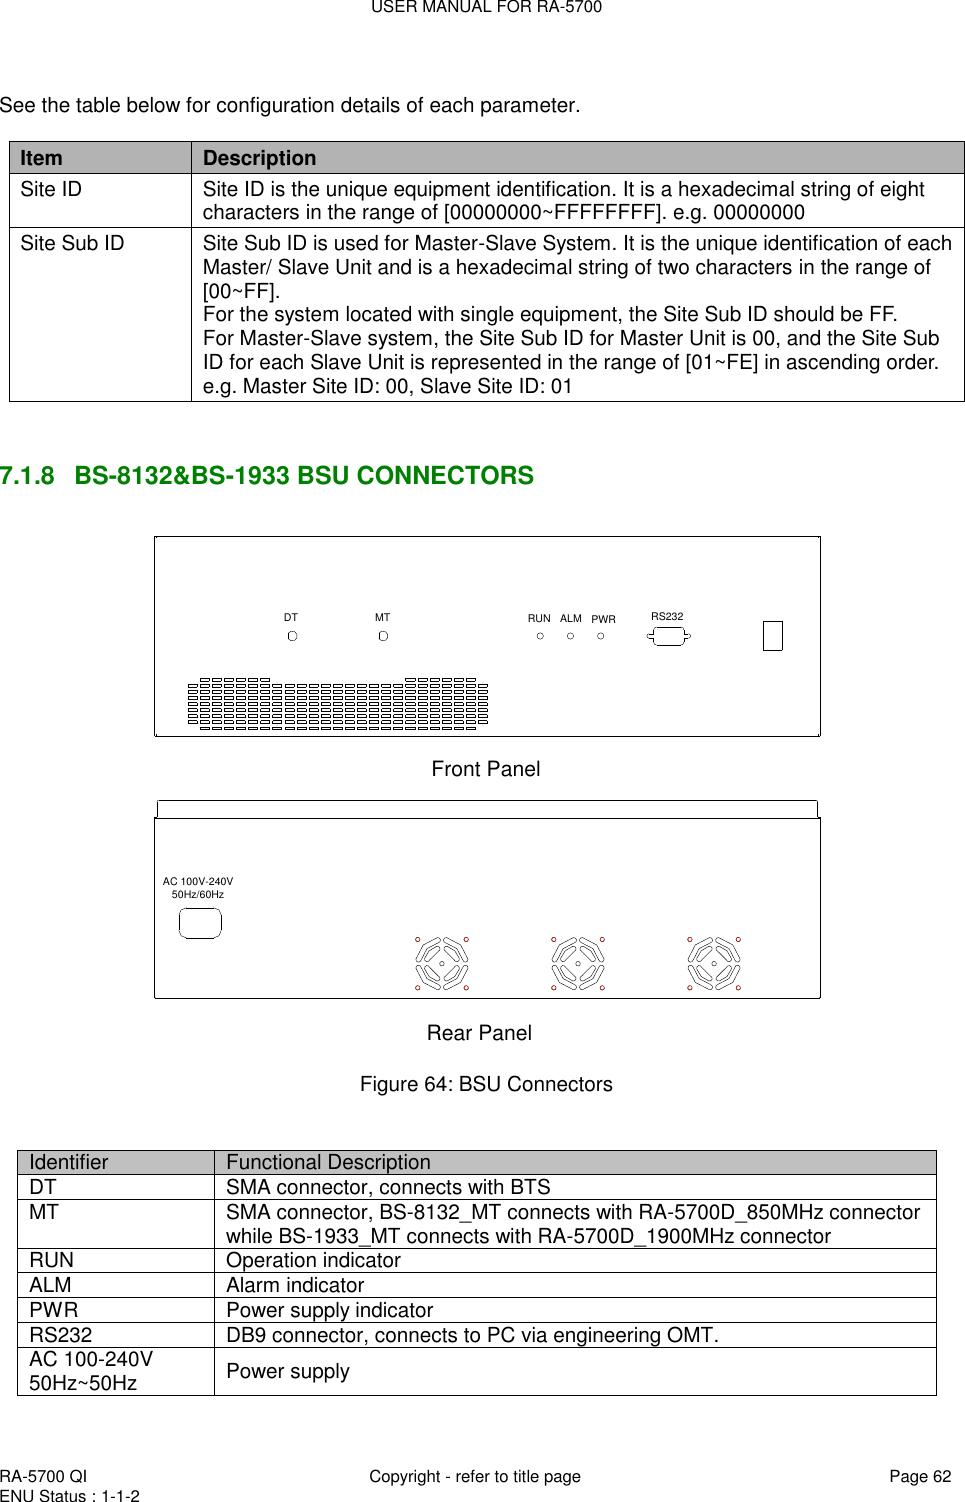 USER MANUAL FOR RA-5700  RA-5700 QI  Copyright - refer to title page Page 62 ENU Status : 1-1-2     See the table below for configuration details of each parameter.  Item Description Site ID Site ID is the unique equipment identification. It is a hexadecimal string of eight characters in the range of [00000000~FFFFFFFF]. e.g. 00000000 Site Sub ID Site Sub ID is used for Master-Slave System. It is the unique identification of each Master/ Slave Unit and is a hexadecimal string of two characters in the range of [00~FF]. For the system located with single equipment, the Site Sub ID should be FF.  For Master-Slave system, the Site Sub ID for Master Unit is 00, and the Site Sub ID for each Slave Unit is represented in the range of [01~FE] in ascending order. e.g. Master Site ID: 00, Slave Site ID: 01   7.1.8  BS-8132&amp;BS-1933 BSU CONNECTORS DTFront PanelMT RUN ALM PWR RS232AC 100V-240V50Hz/60HzRear Panel  Figure 64: BSU Connectors   Identifier Functional Description DT SMA connector, connects with BTS  MT SMA connector, BS-8132_MT connects with RA-5700D_850MHz connector while BS-1933_MT connects with RA-5700D_1900MHz connector RUN Operation indicator ALM Alarm indicator PWR Power supply indicator RS232 DB9 connector, connects to PC via engineering OMT.  AC 100-240V 50Hz~50Hz Power supply  